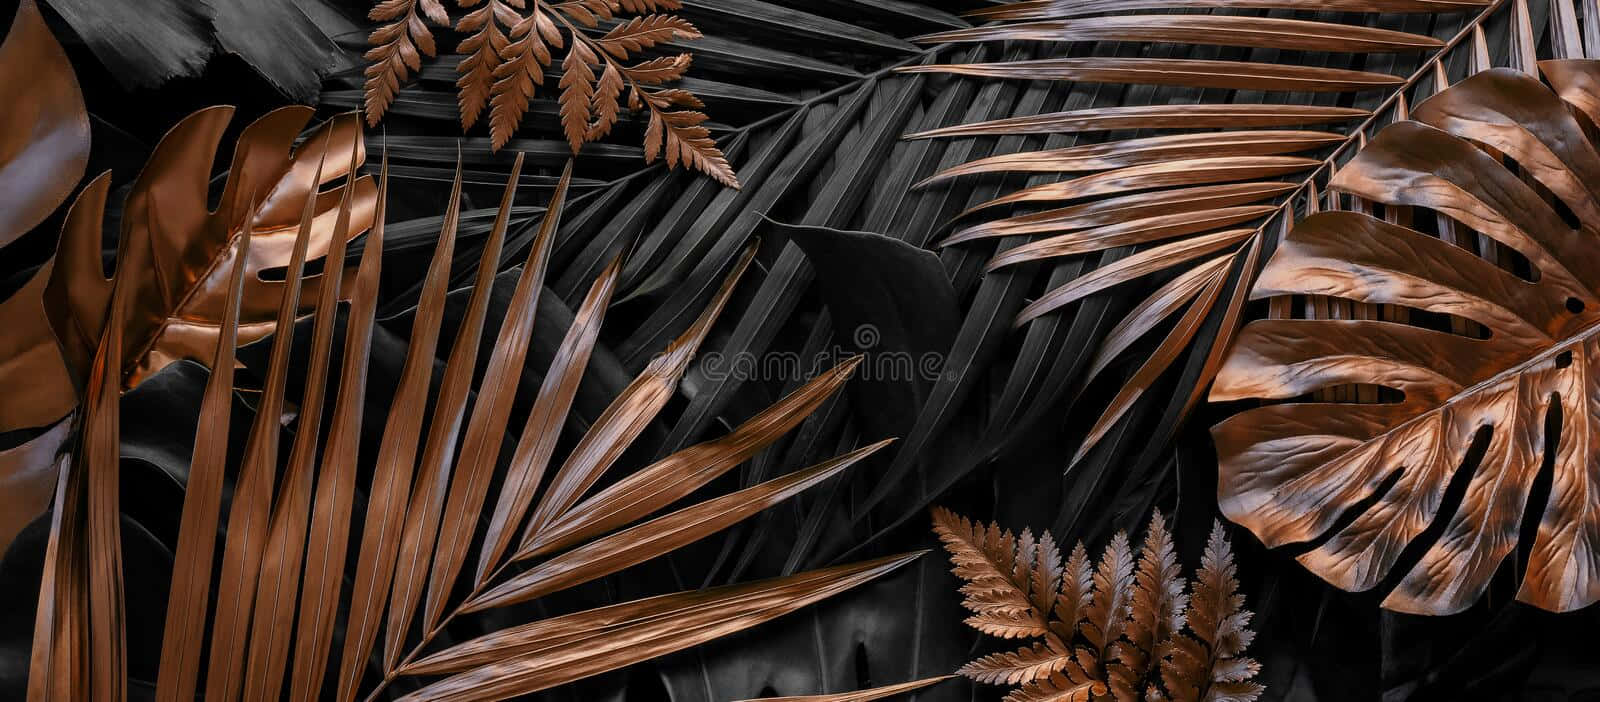 Aesthetic Palm Leaves in a Tropical Setting Wallpaper